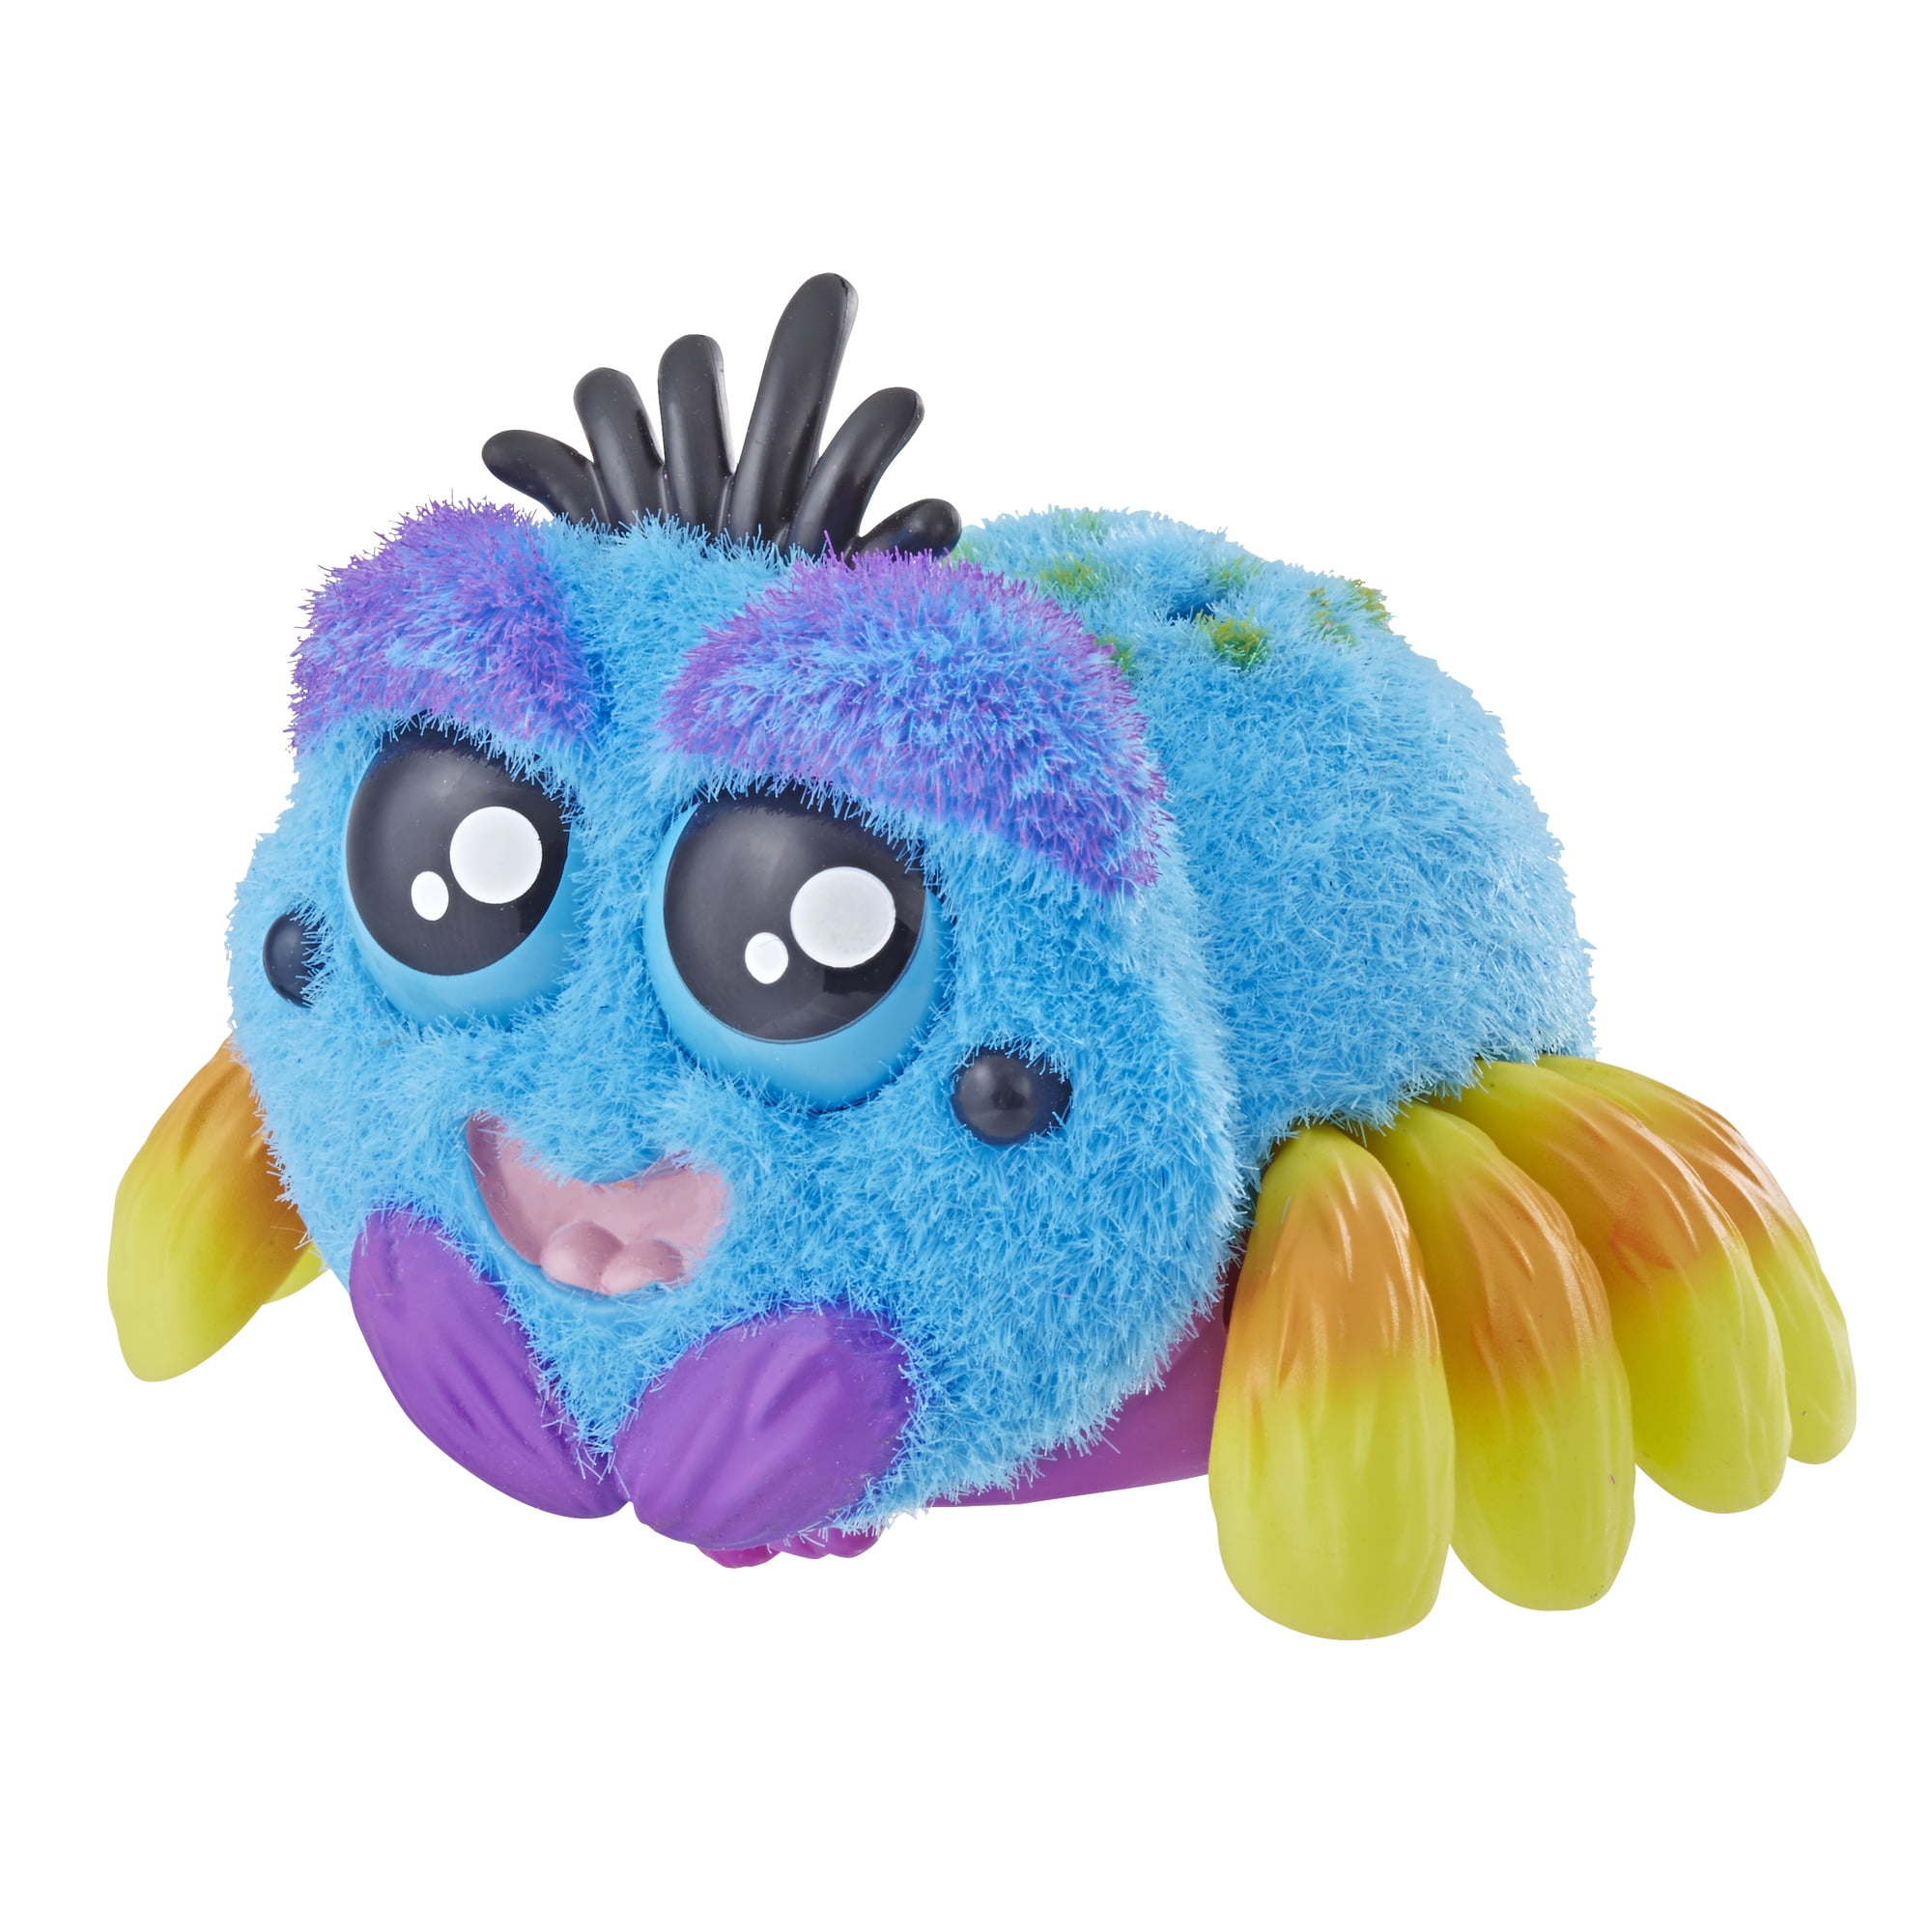 Yellies E5785as00 Frizz Voice-activated Spider Pet Ages 5 and up for sale online 